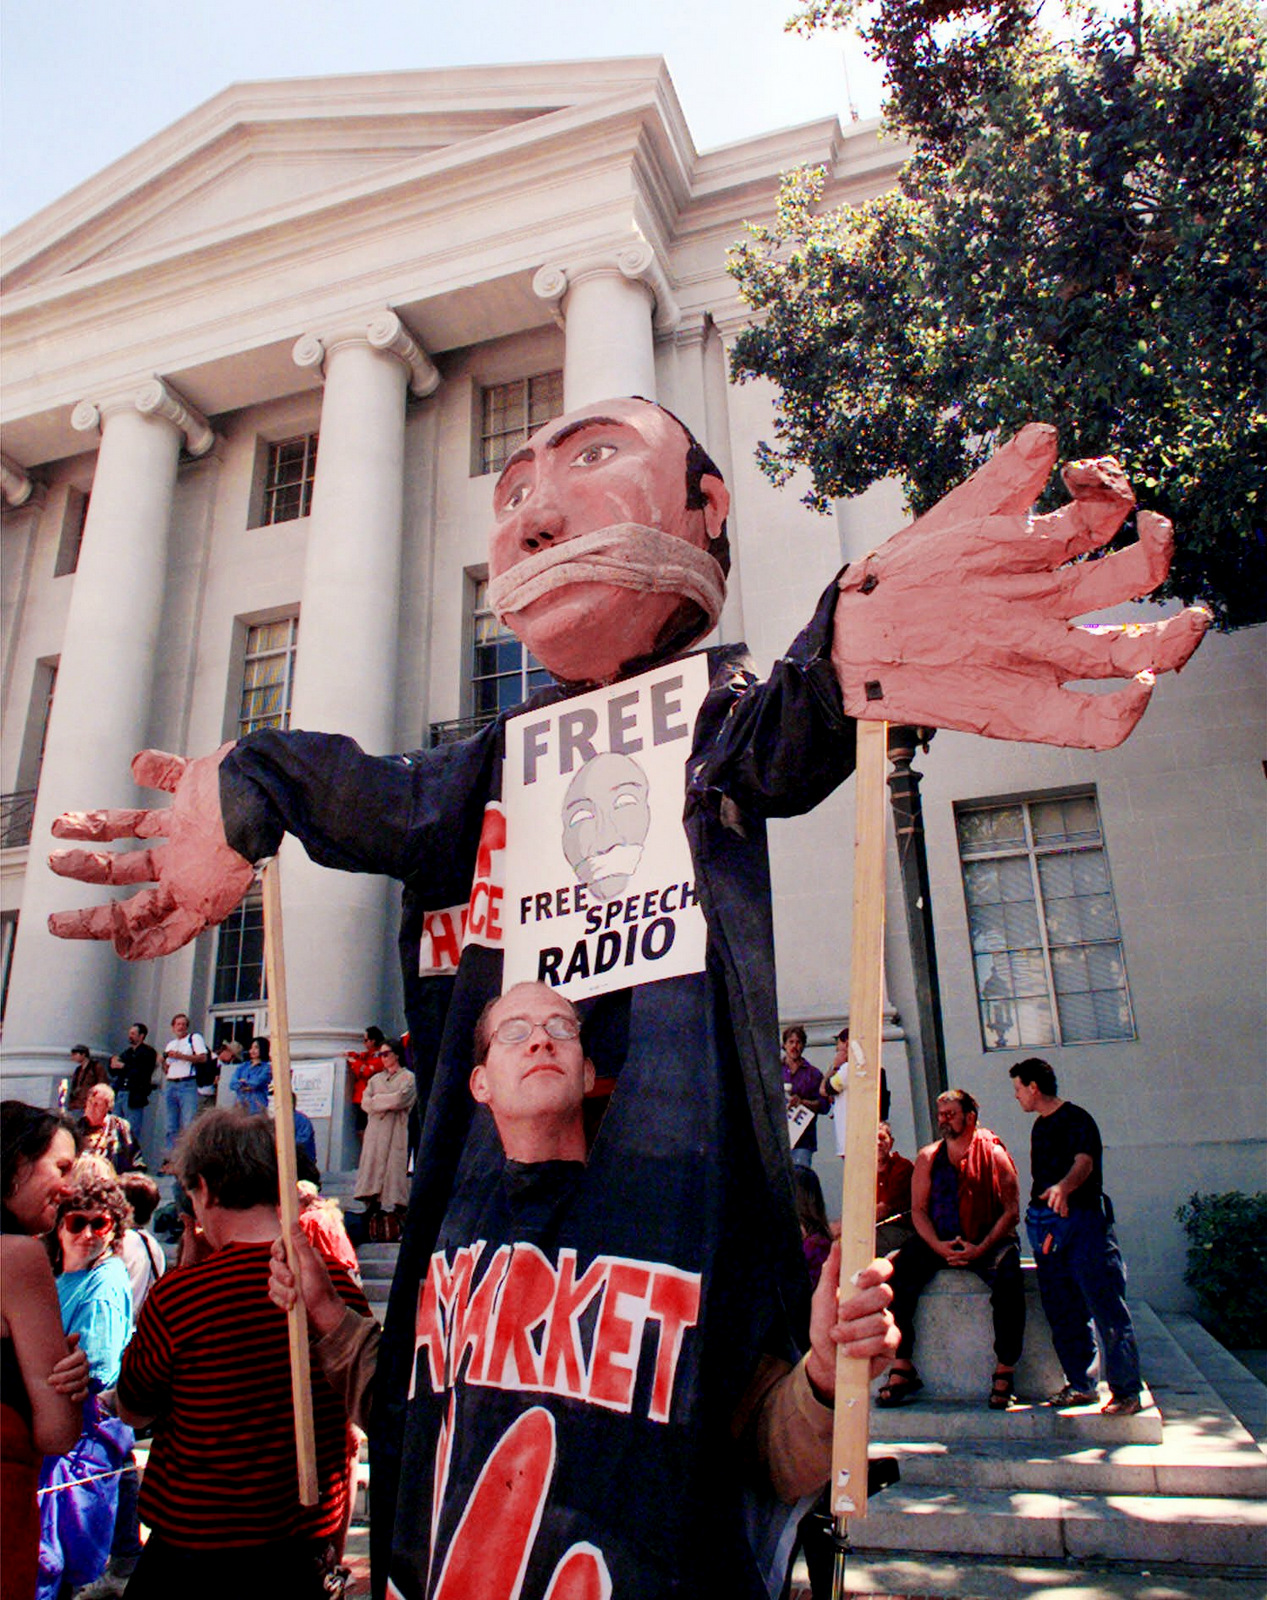 A rally at University of California at Berkeley over keeping local control of KPFA, owned by the Pacifica Foundation, which syndicates Democracy Now! (AP/Paul Sakuma)